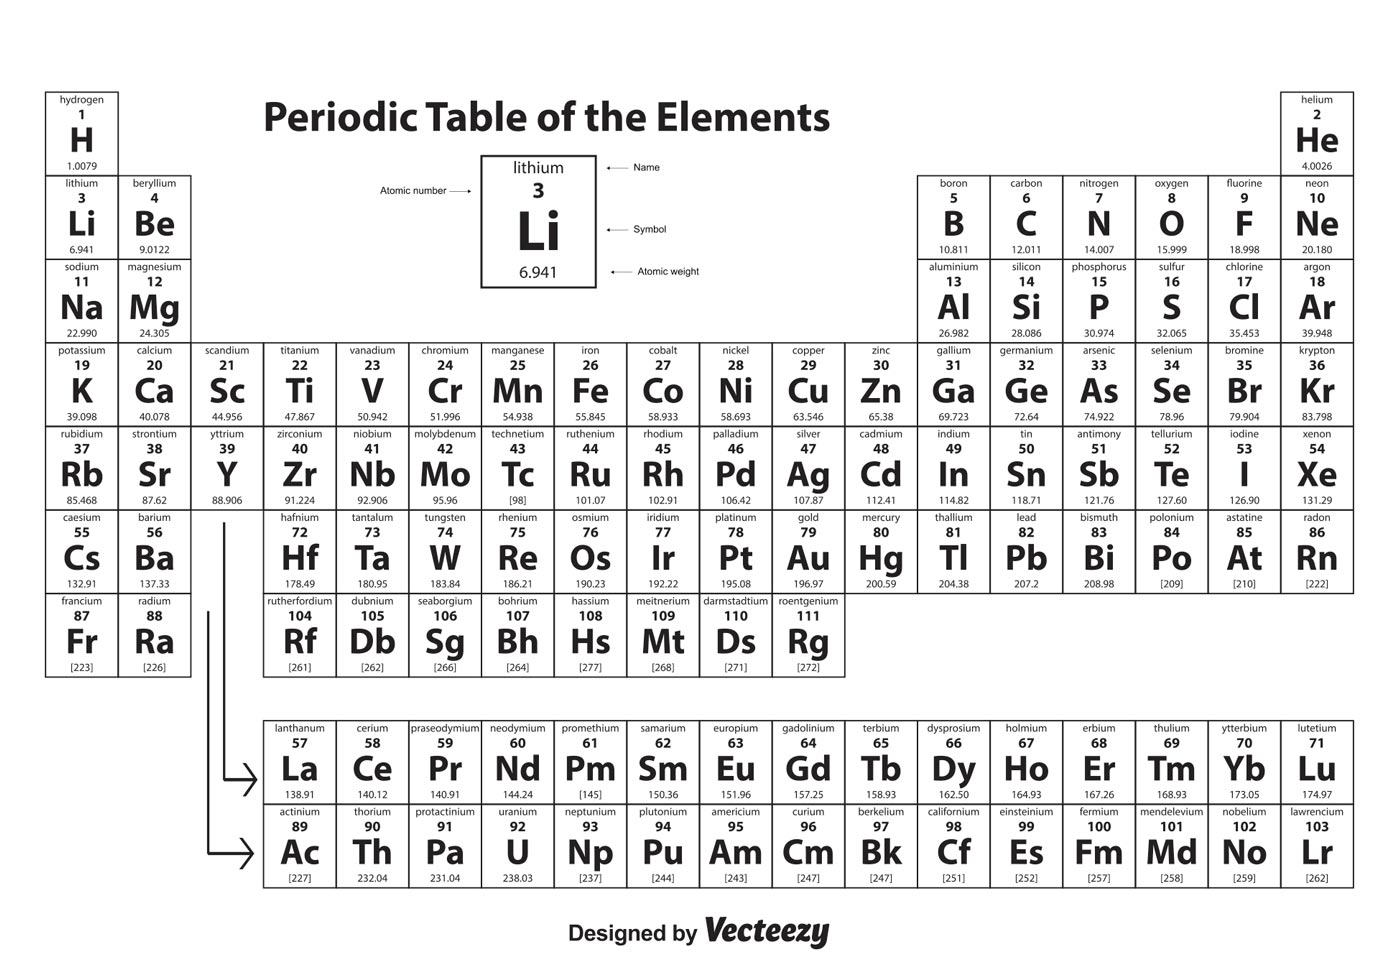 Periodic Table Free Vector Art - (17421 Free Downloads)